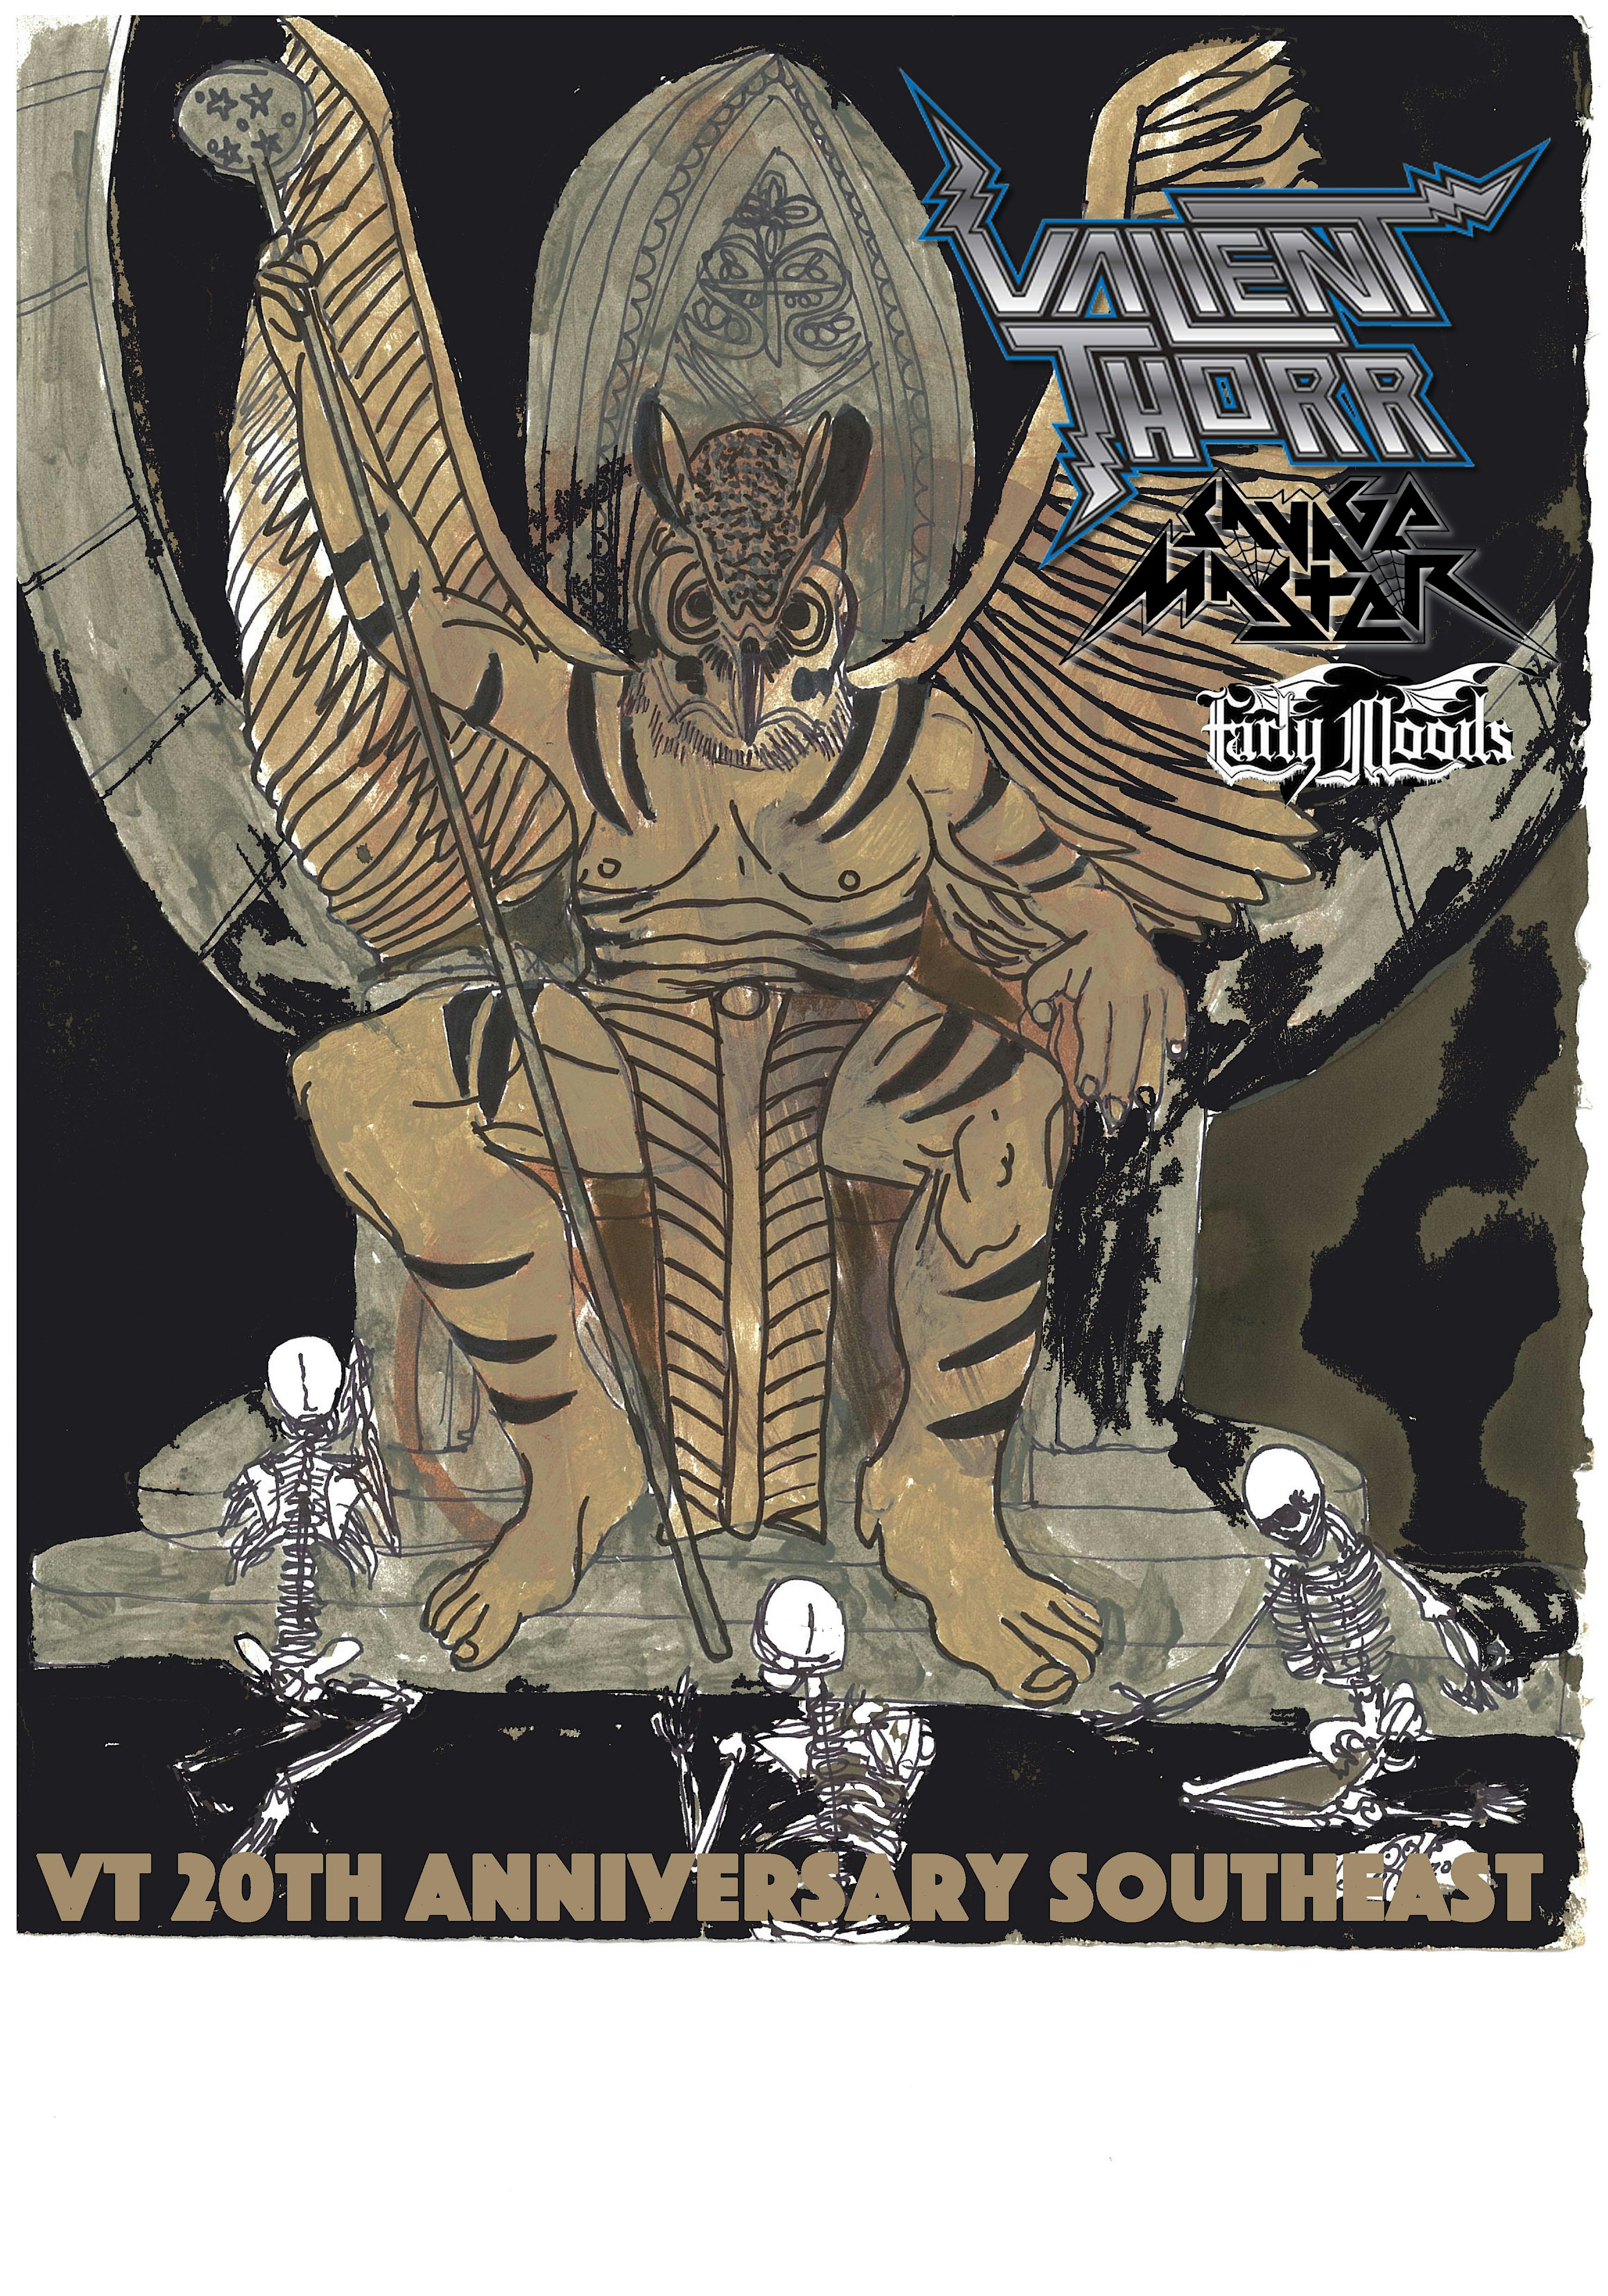 Valient Thorr 20th Annivertsary tour in Orlando at Will's Pub w/ Savage Master, Early Moods, and American Party Machine